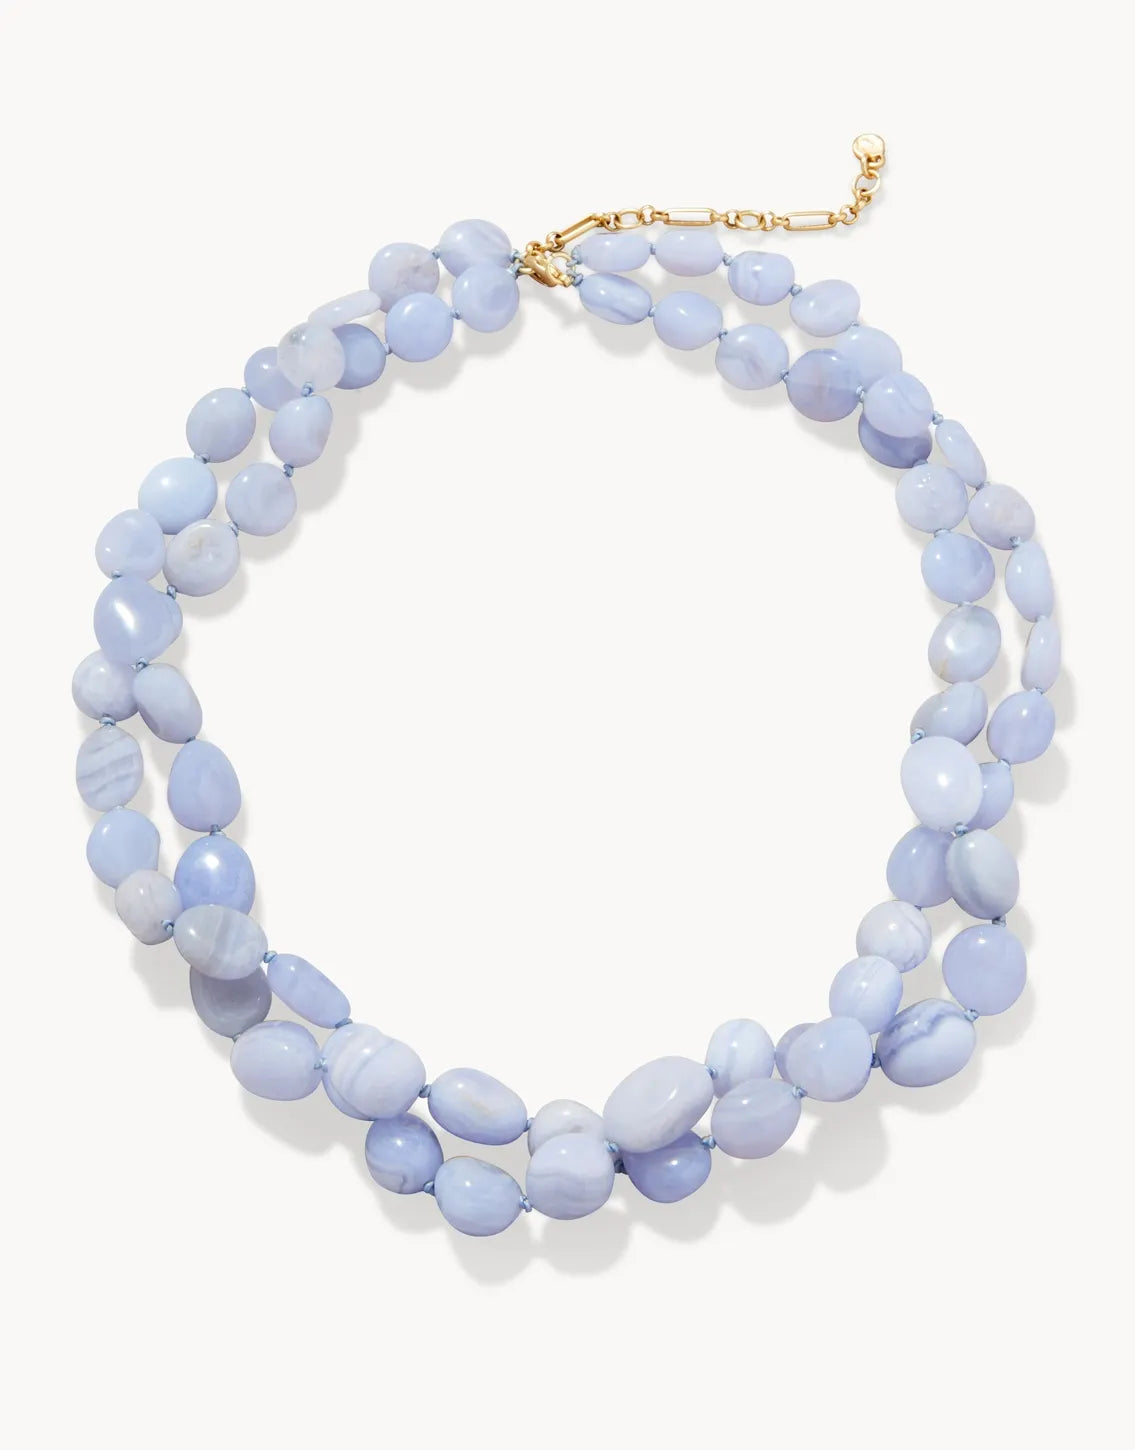 THE BLUFF NECKLACE BLUE CHALCEDONY